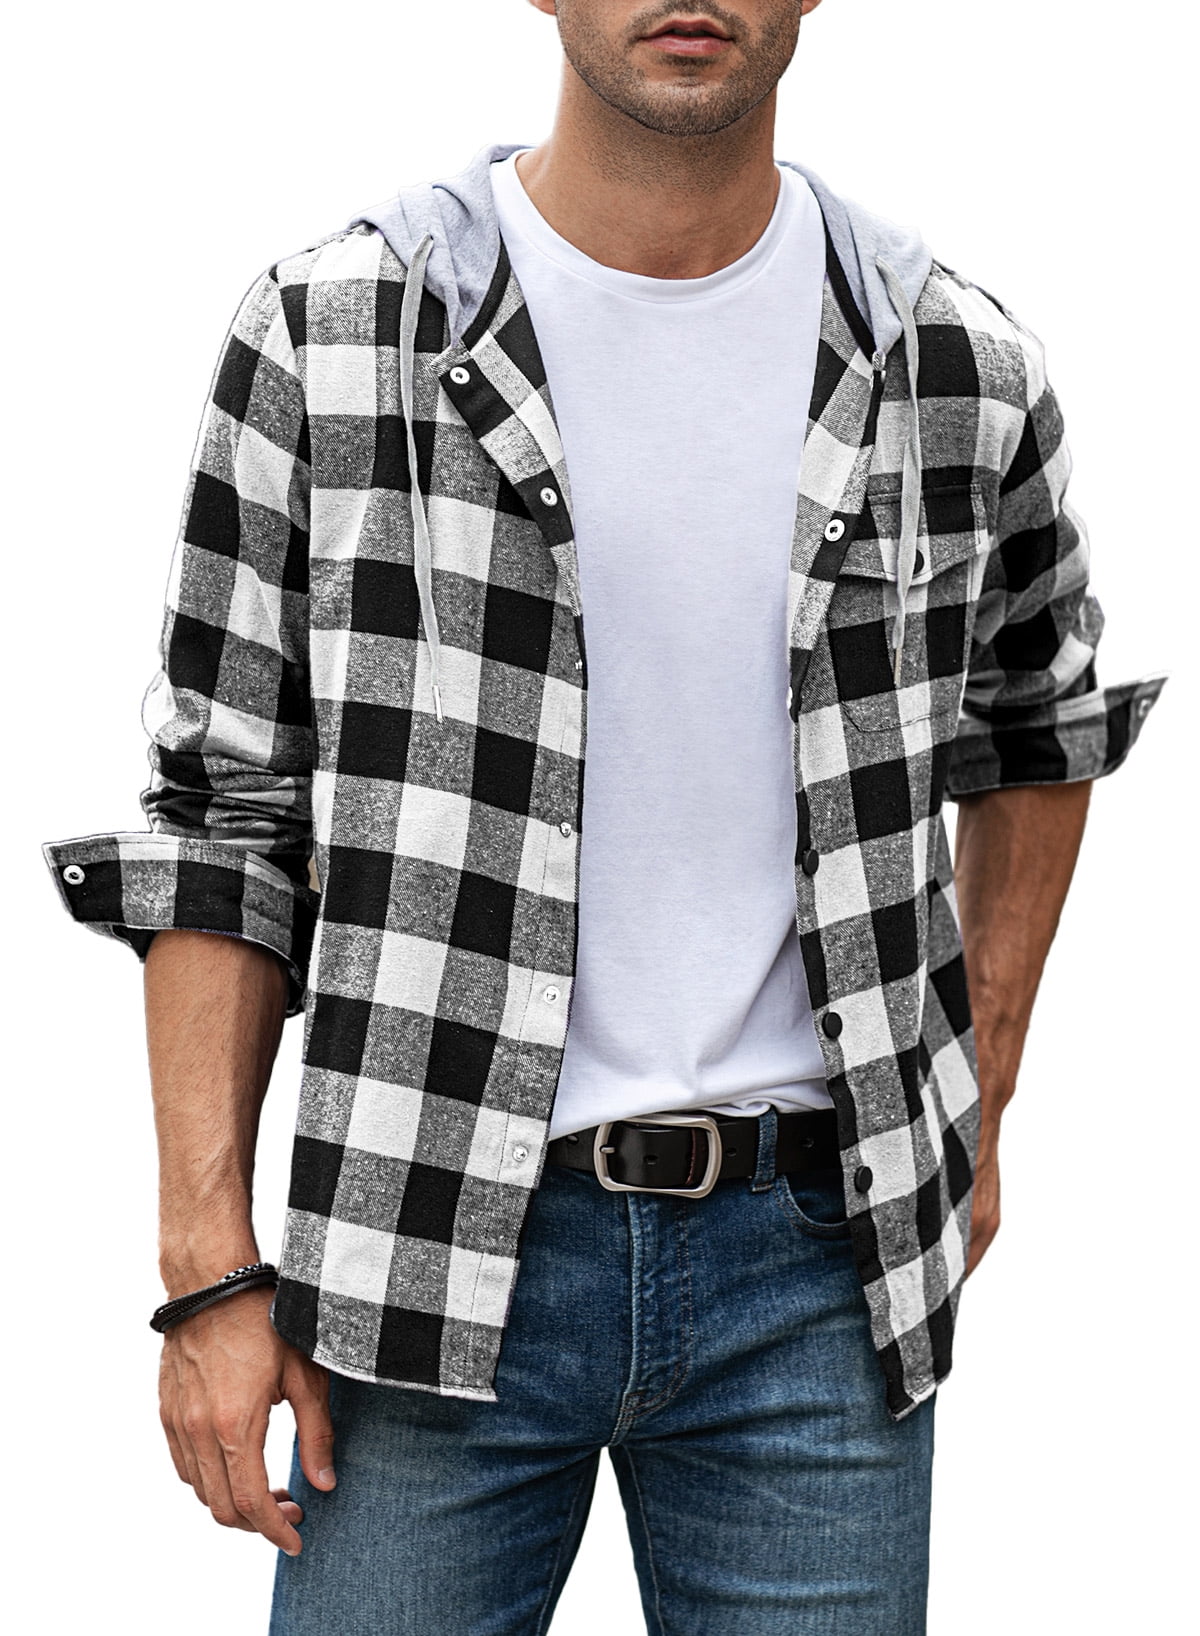 JMIERR Big and Tall Men's Casual Long Sleeve Hooded Flannel Shirts  Lightweight Drawstring Button Down Jackets Shirt with Pocket 